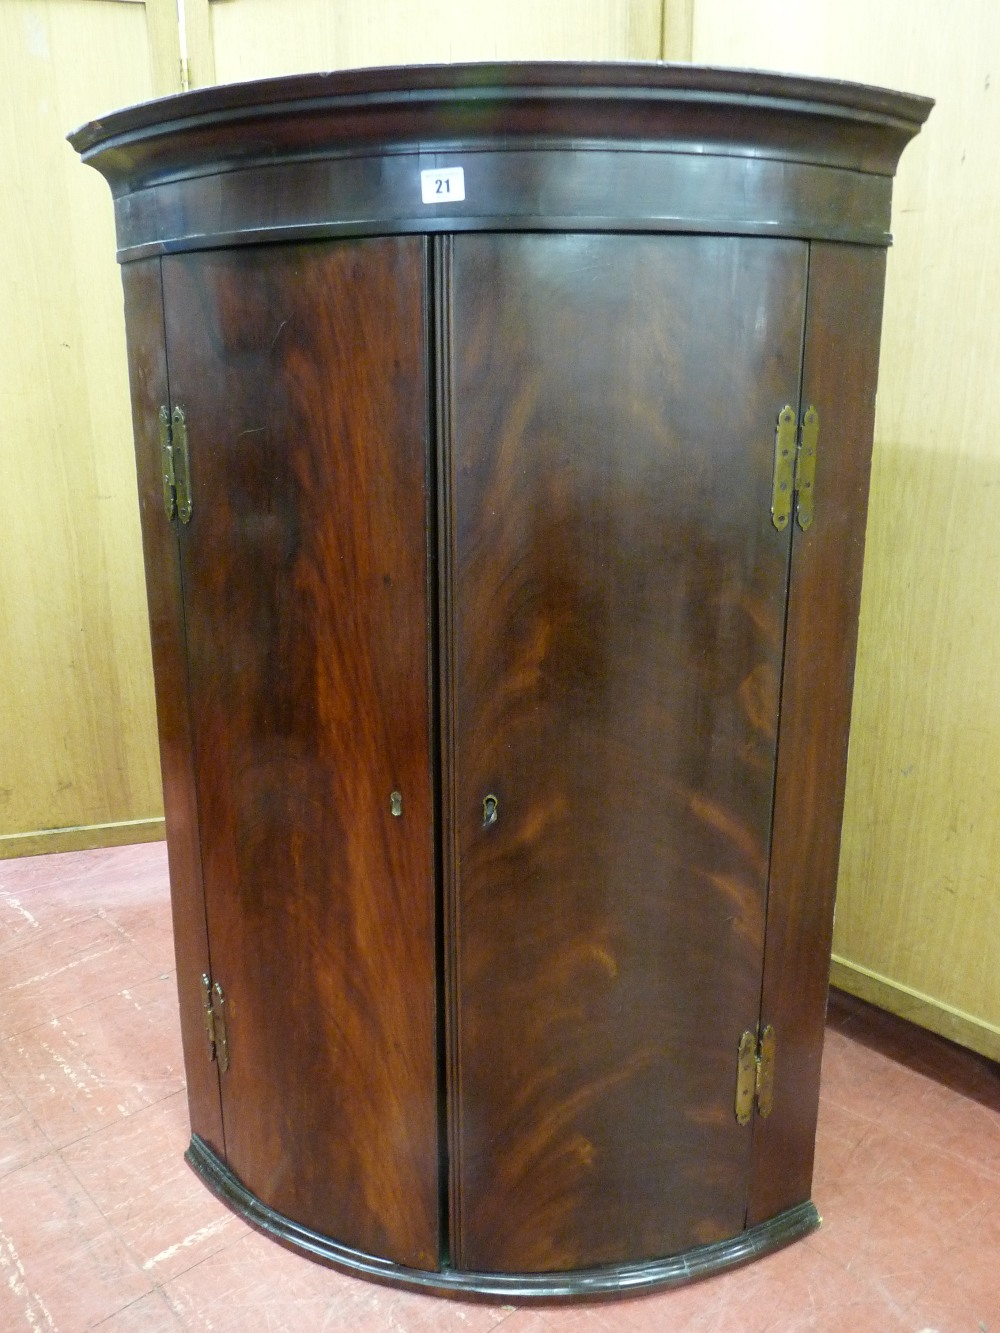 A GEORGIAN MAHOGANY HANGING WALL CUPBOARD with twin bow fronted doors, brass 'H' hinges and green